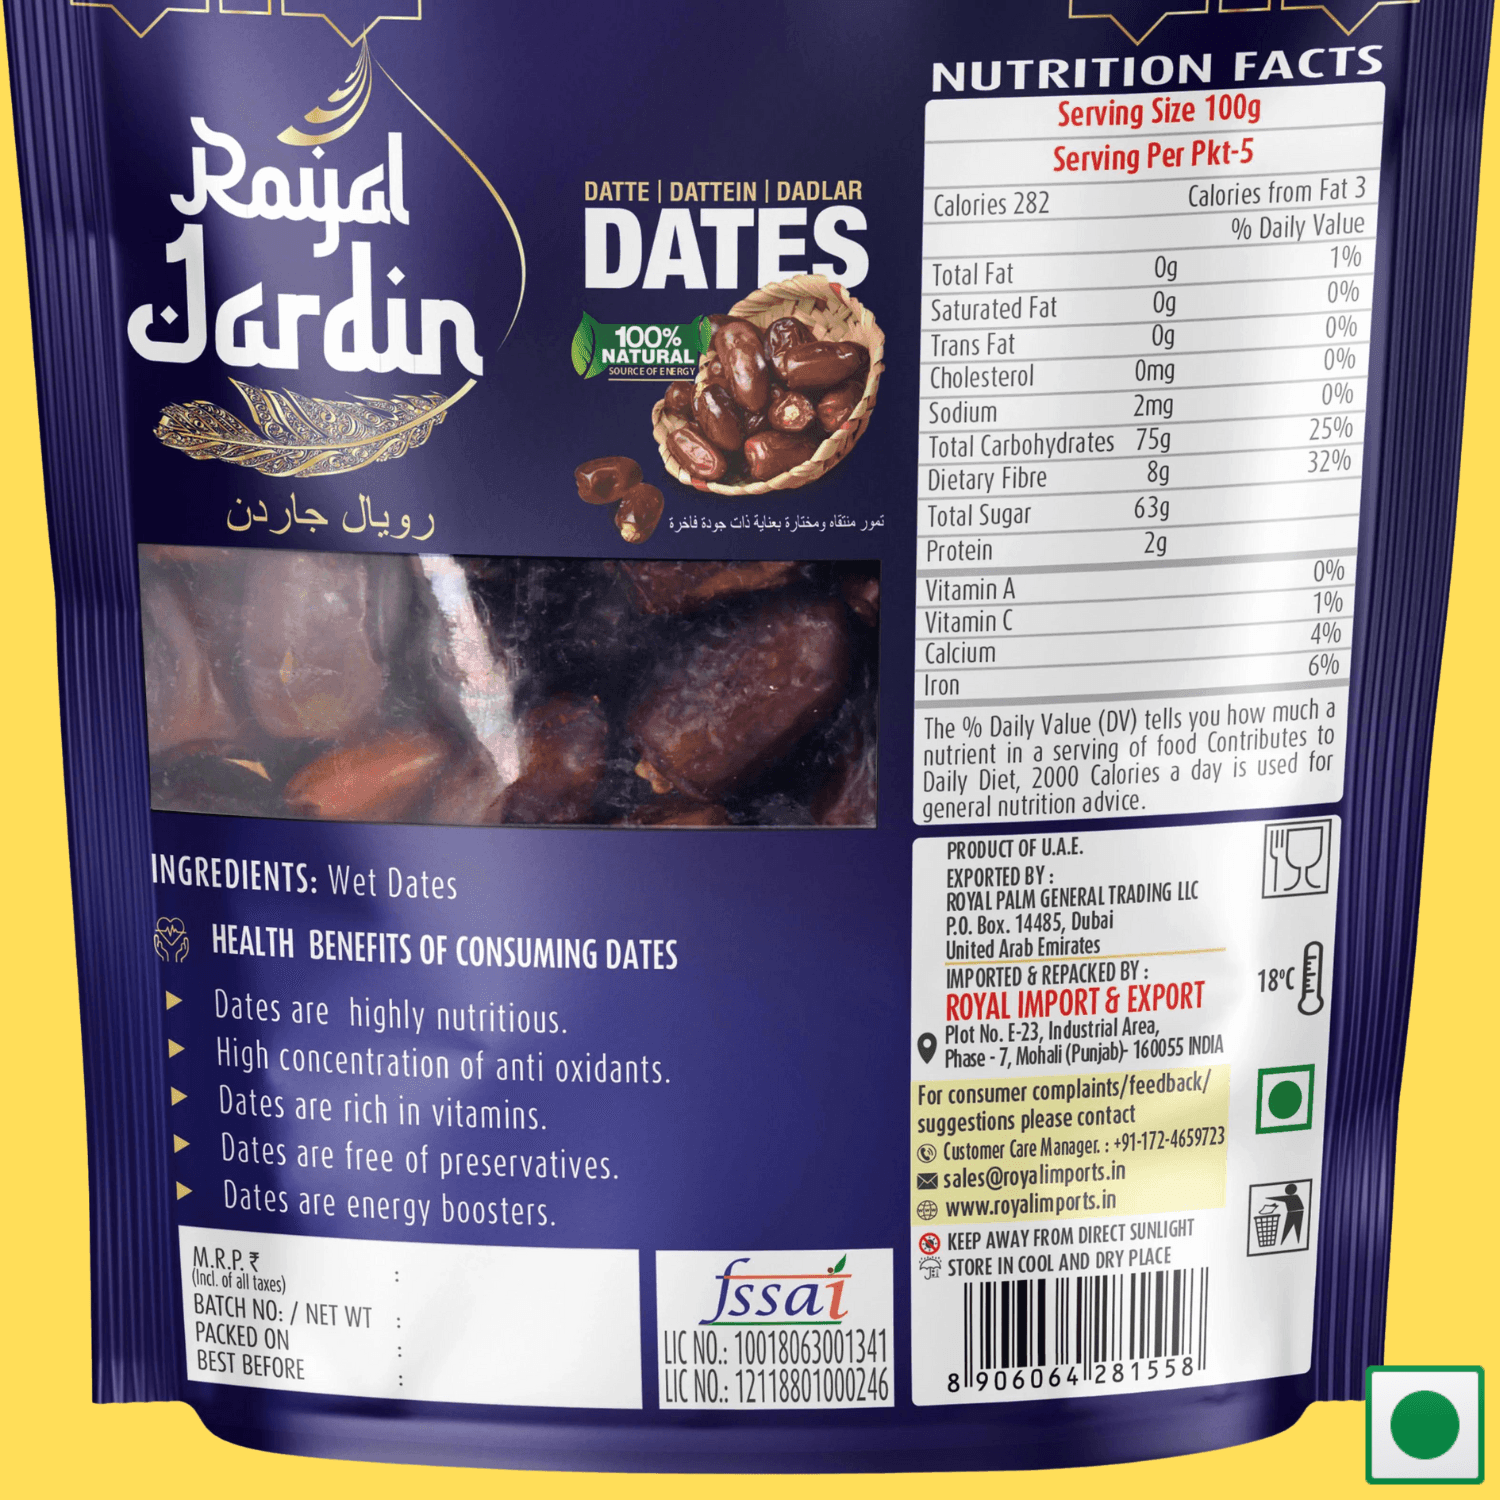 Royal Jardin Fard Dates Pouch, 500g (IMPORTED) - Super 7 Mart